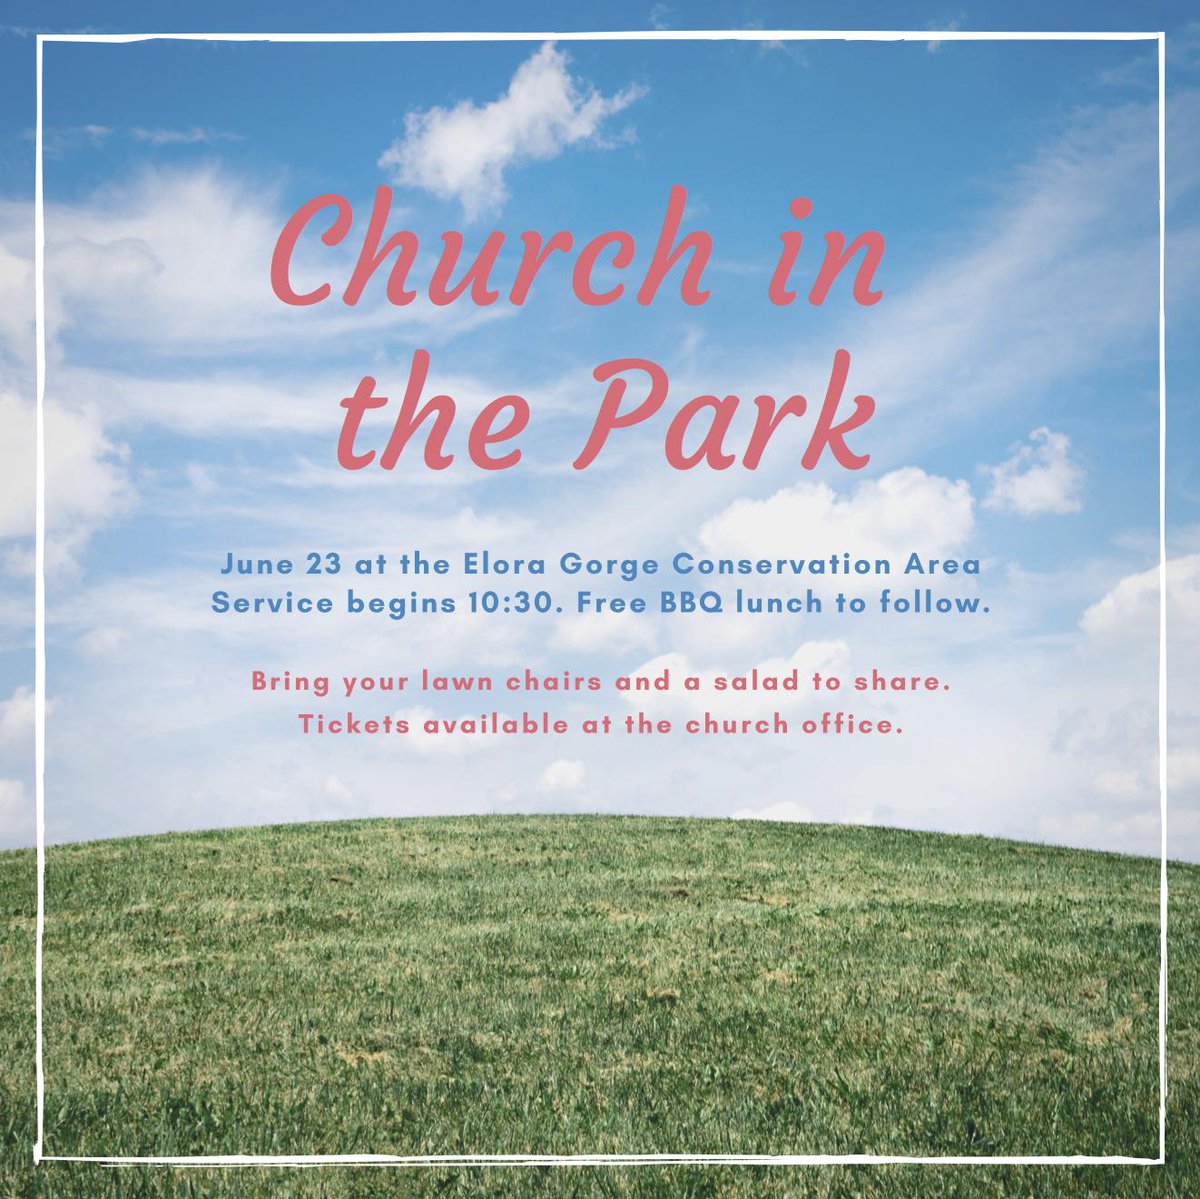 Final reminder for Church in the Park tomorrow.  Service starts at 10:30 with lunch to follow. Bring your lawn chairs and a salad to share. Everything else will be provided by Central. There will be sports and games for children of most ages! 

#elorafergus #welcome2central